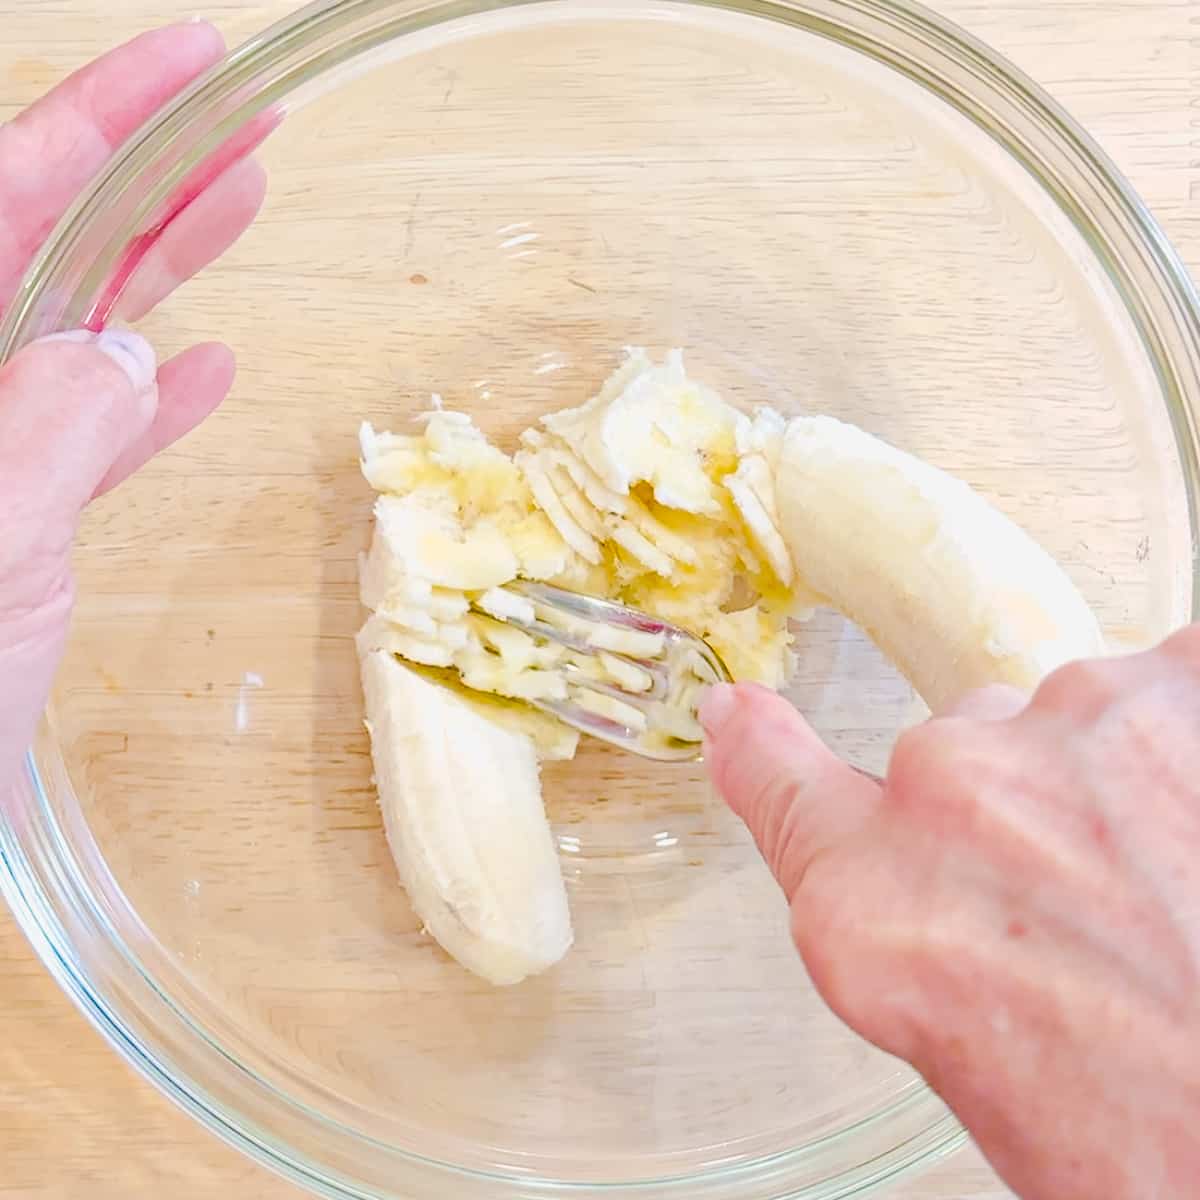 Mashing a banana with a fork in a glass bowl.